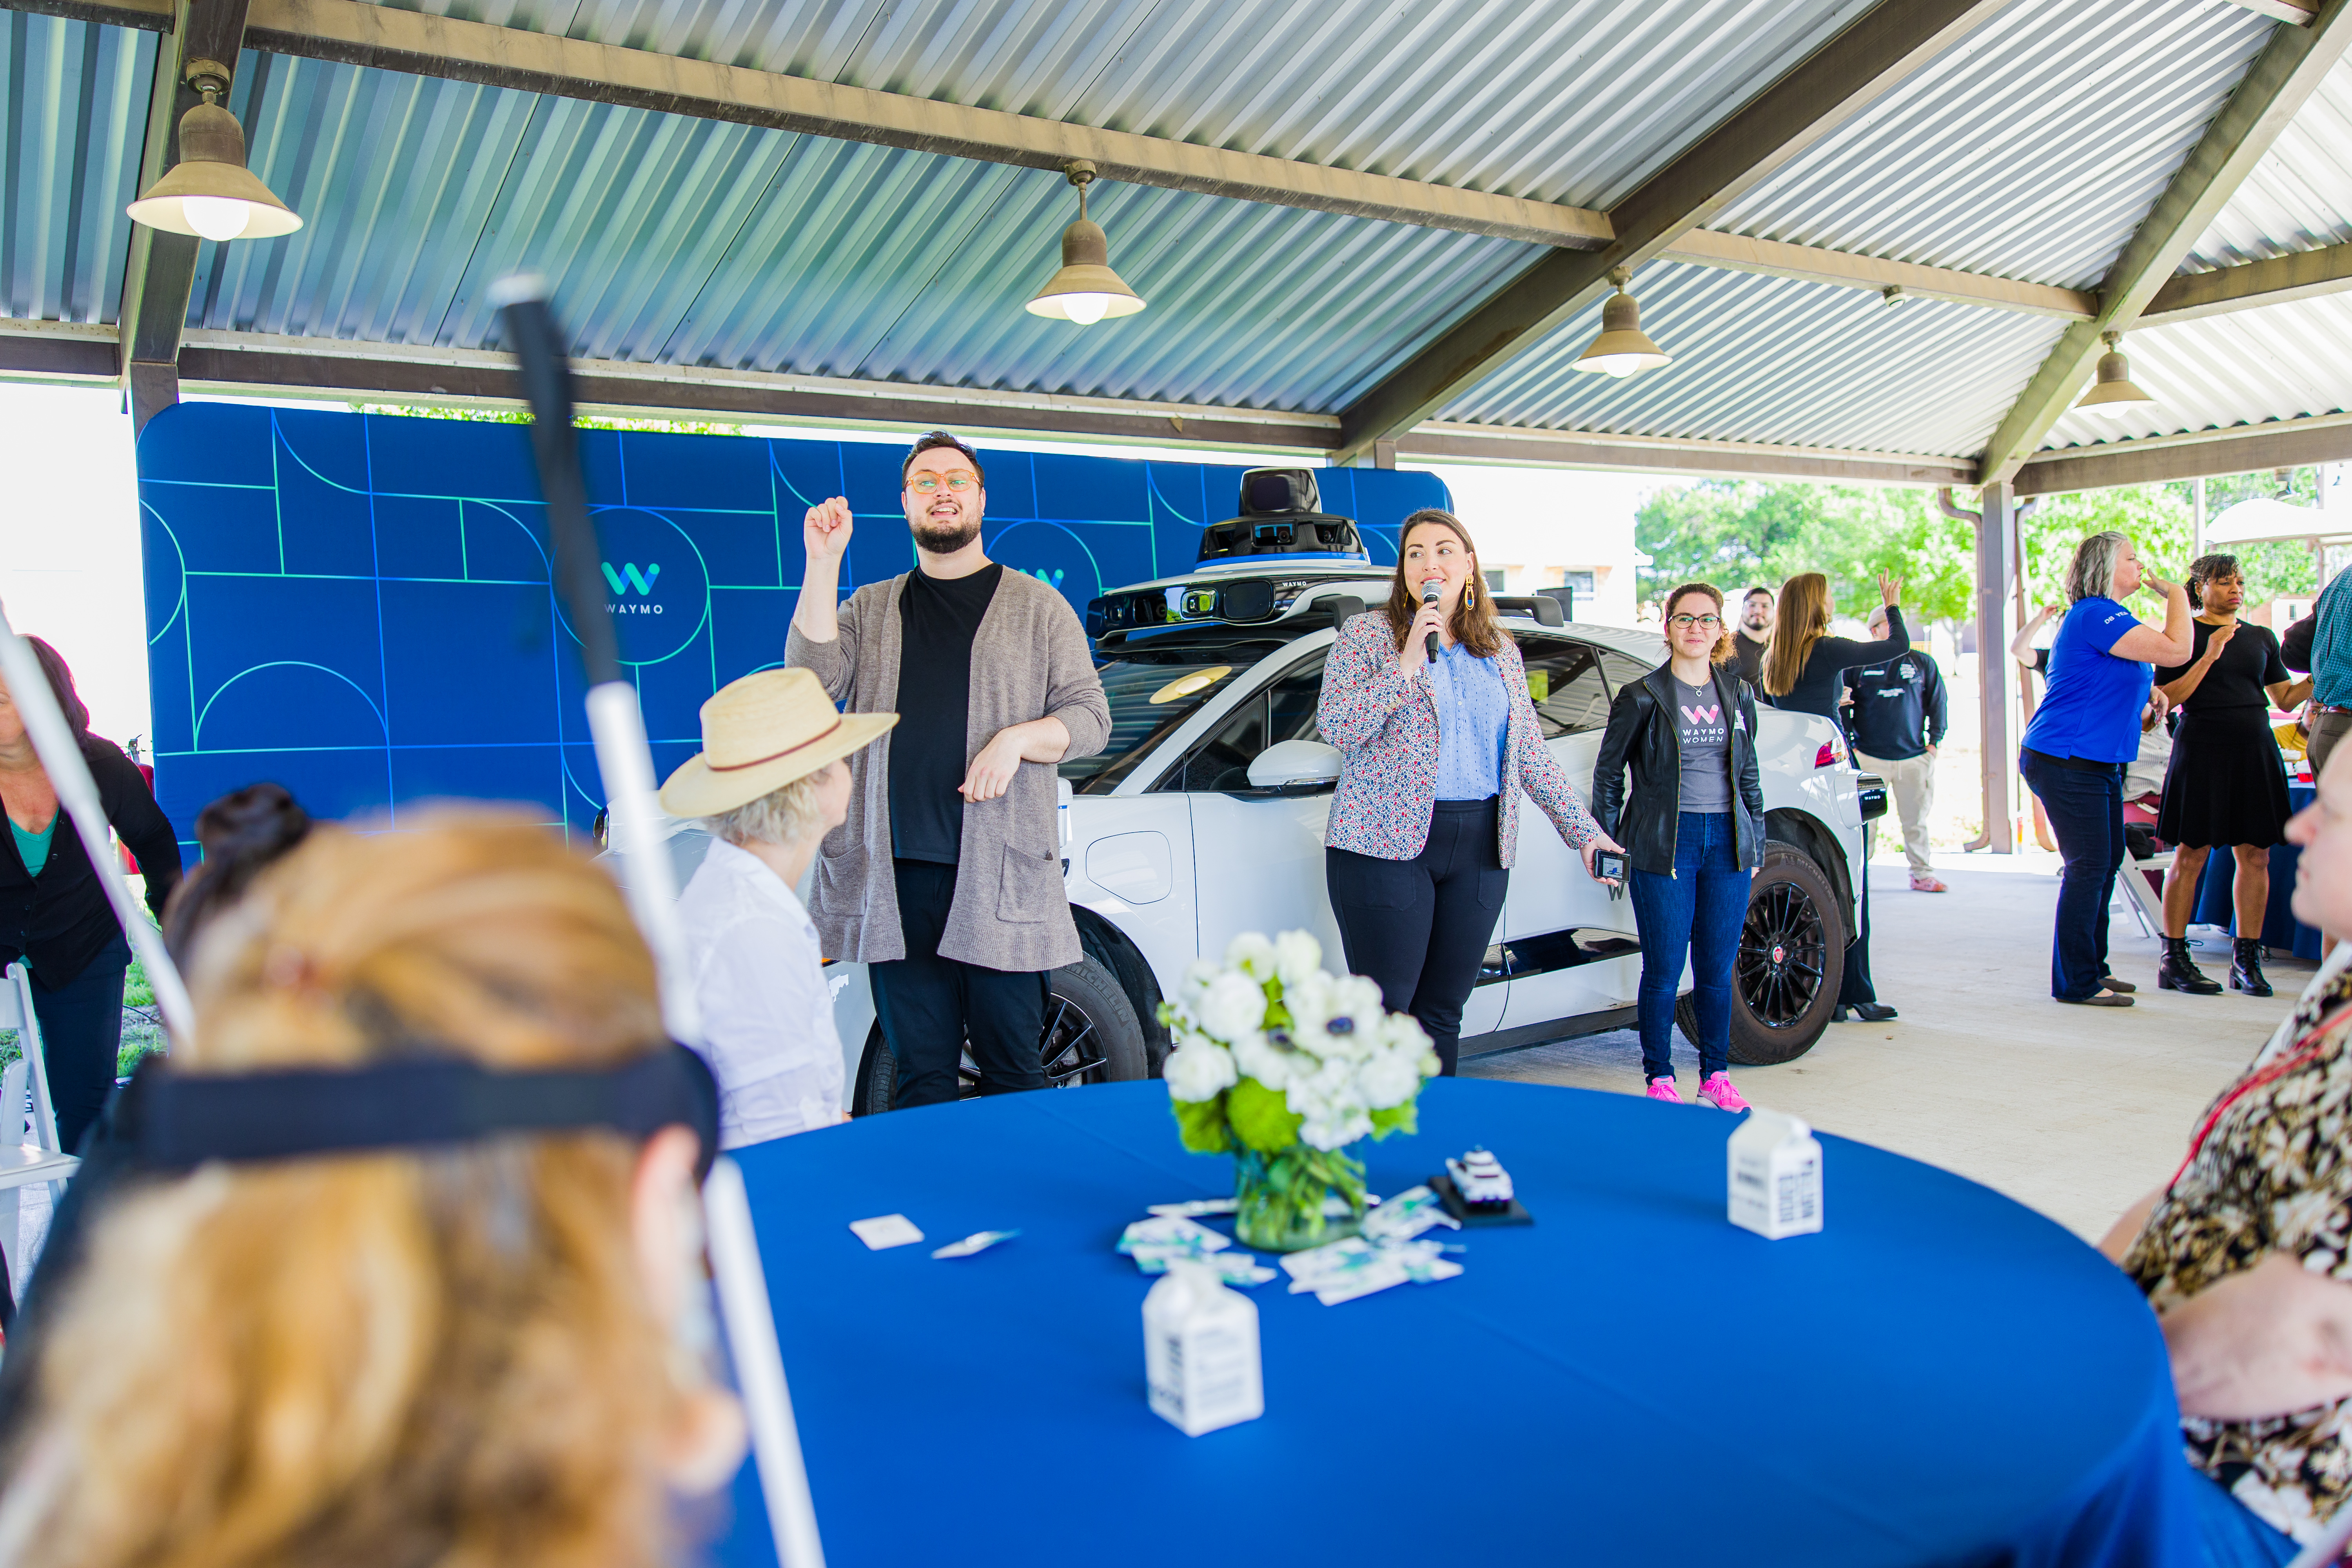 Representatives from Waymo standing next to an ASL interpreter in front of a crowd, next to a Waymo vehicle